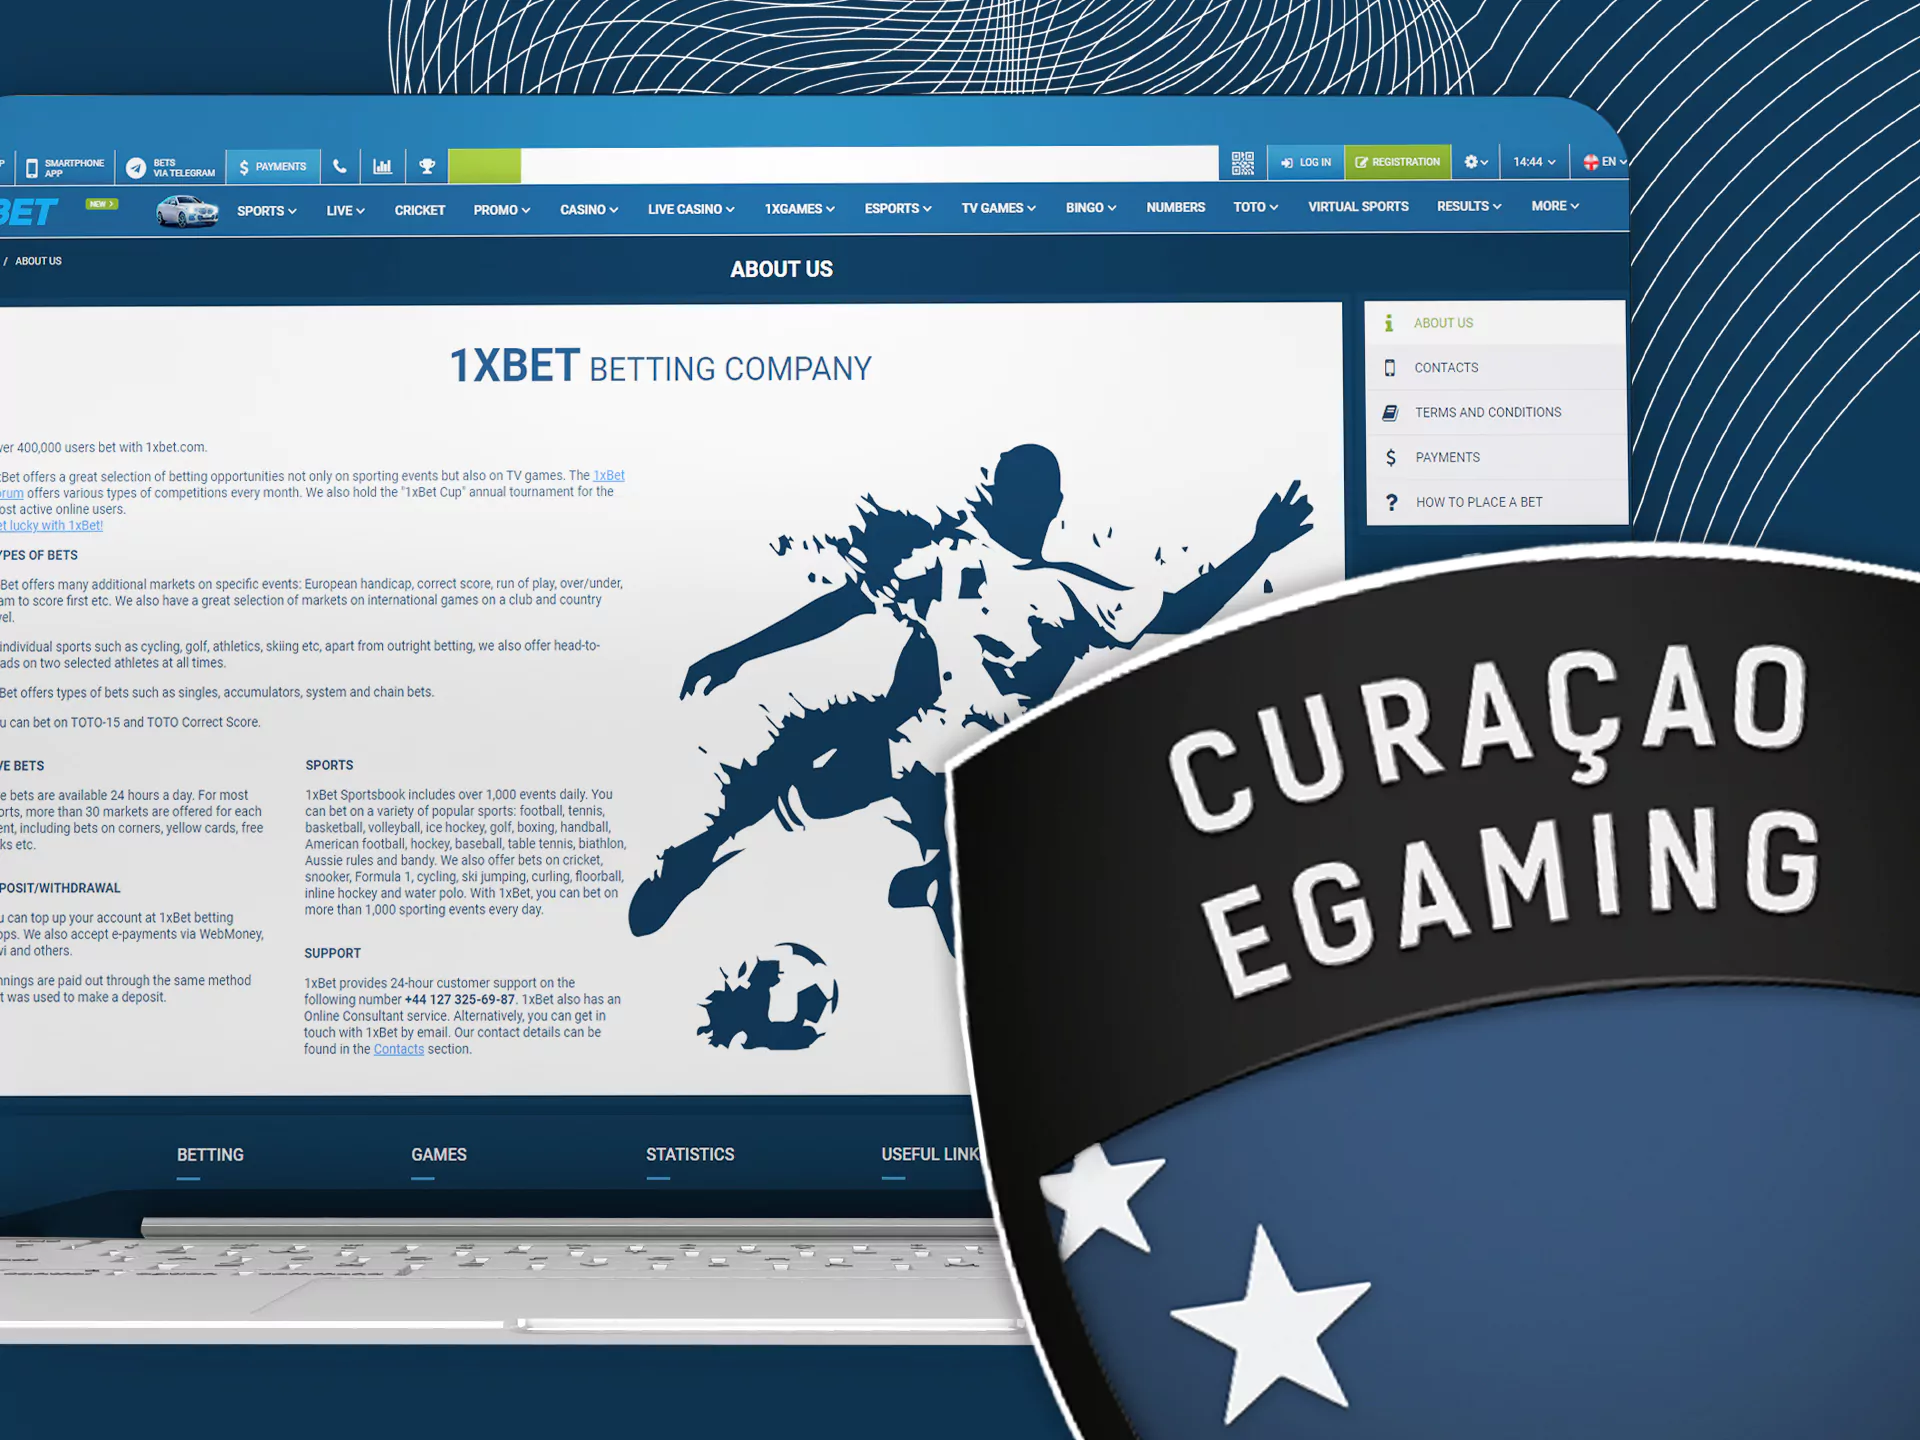 1xBet is a secure bookmaker and casino site that was verified by Curacao Egaming.